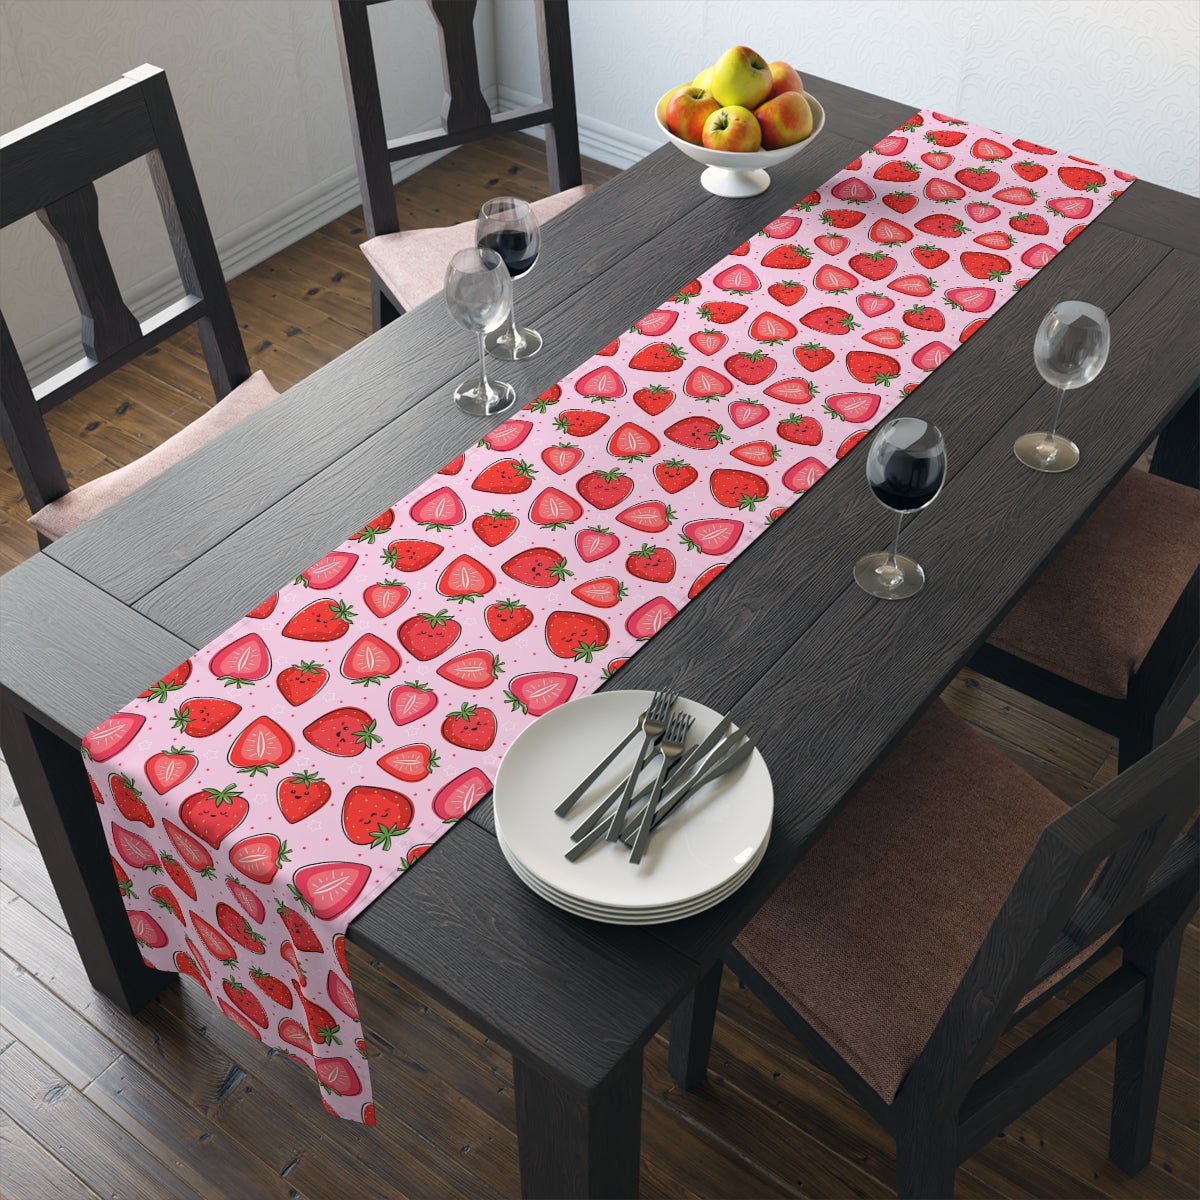 Kawaii Strawberries Table Runner - Puffin Lime